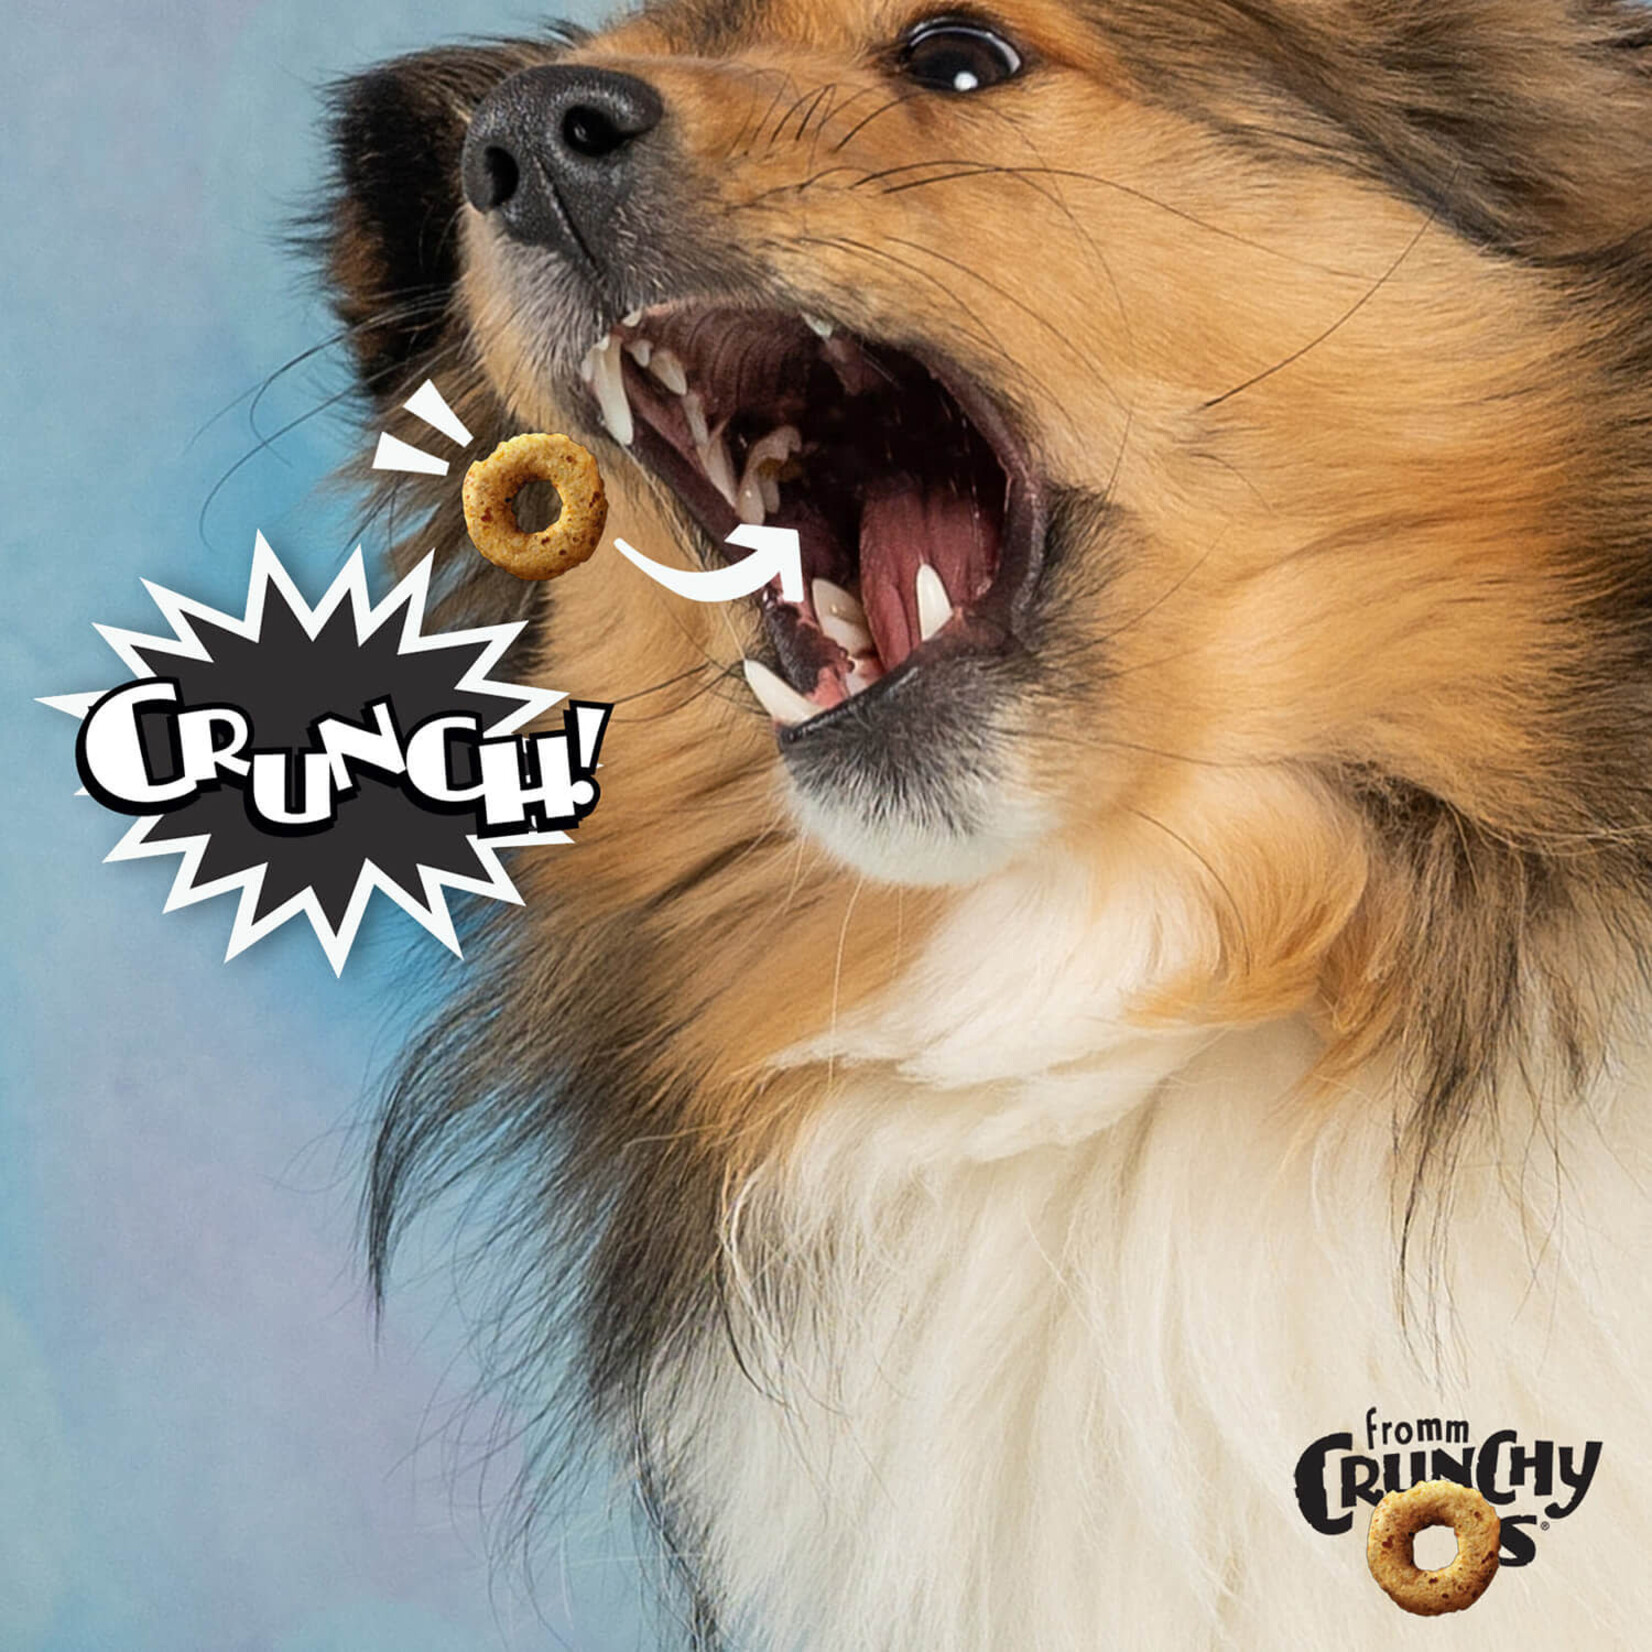 Fromm Crunchy Os Bacon Blasters Flavor Dog Treats